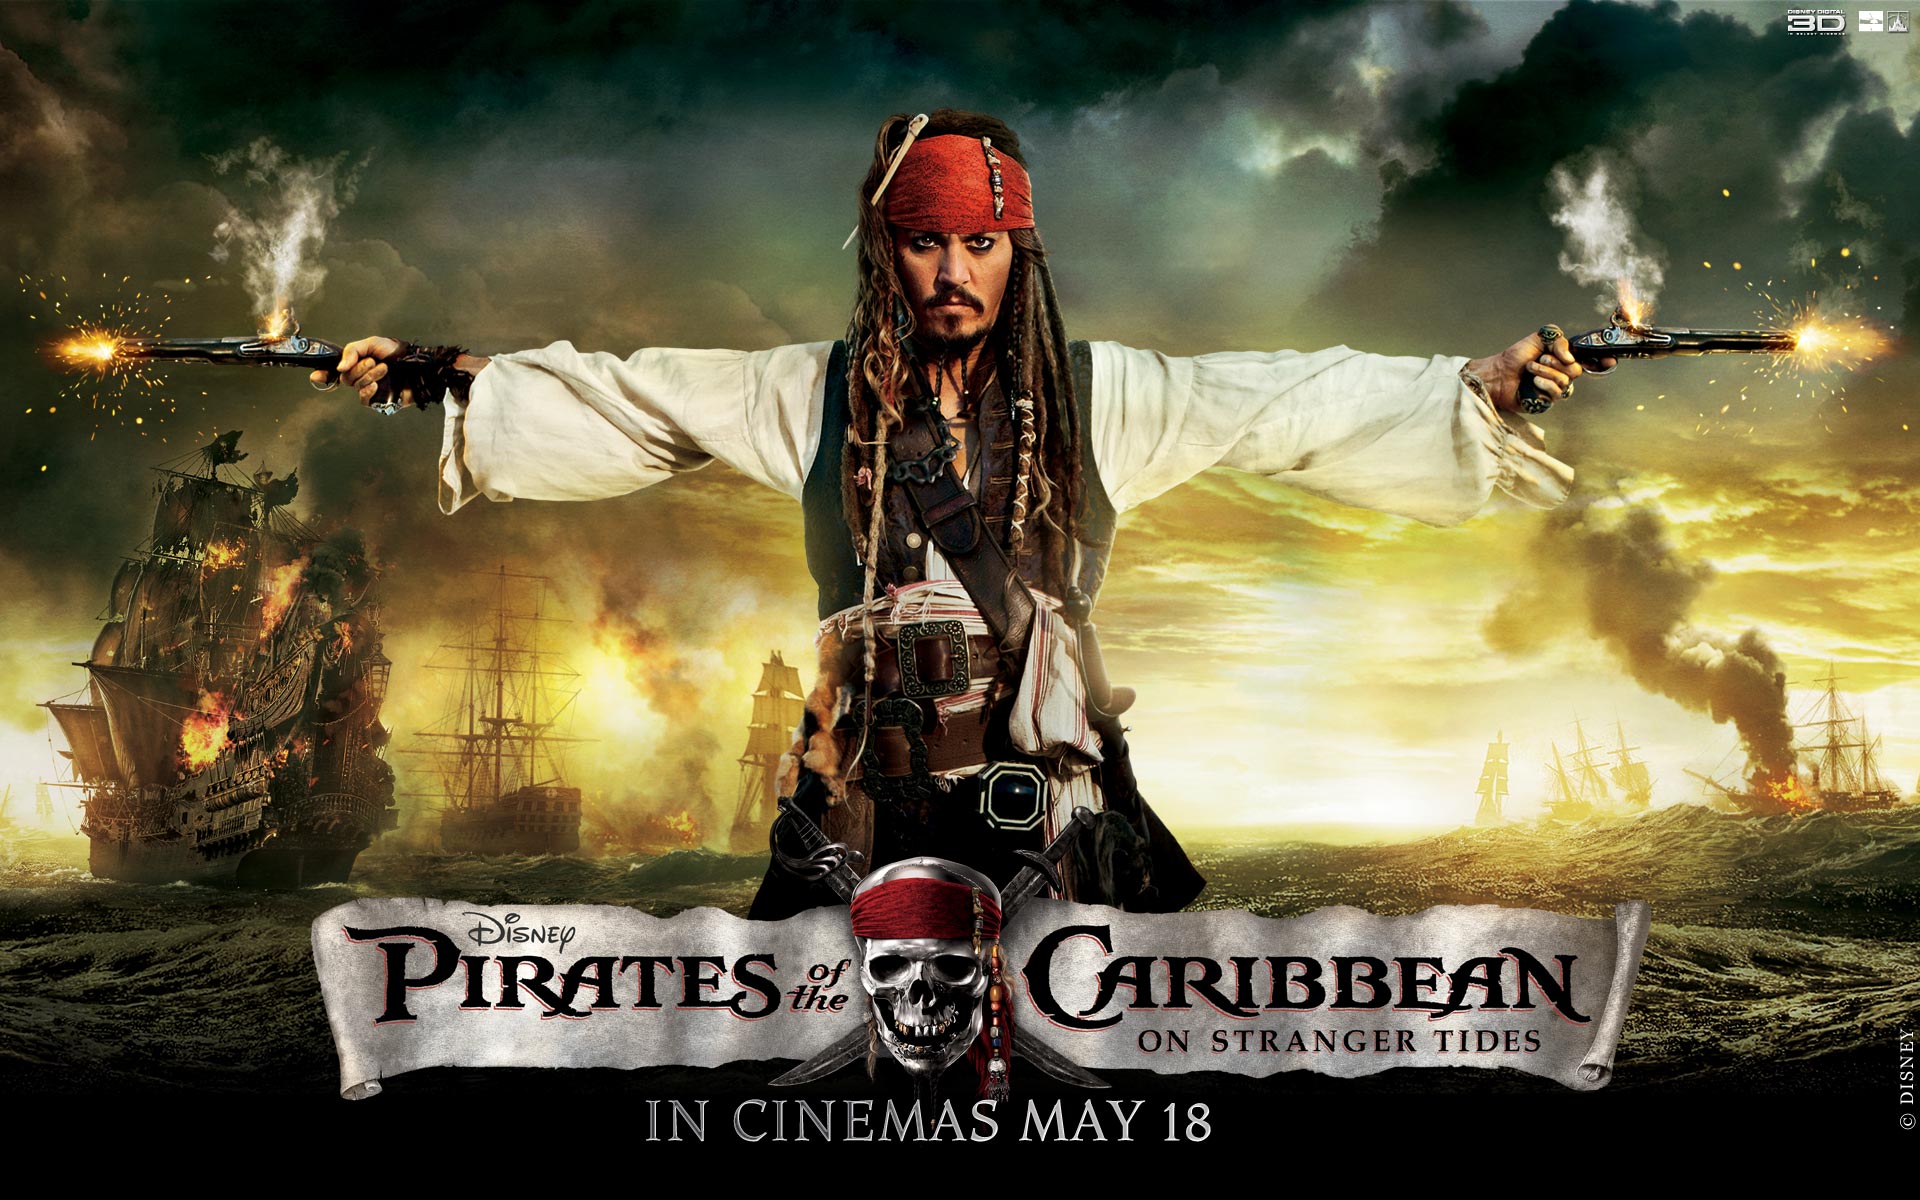 jack sparrow, pirates of the caribbean, pirates of the caribbean: on stranger tides, johnny depp, movie HD wallpaper